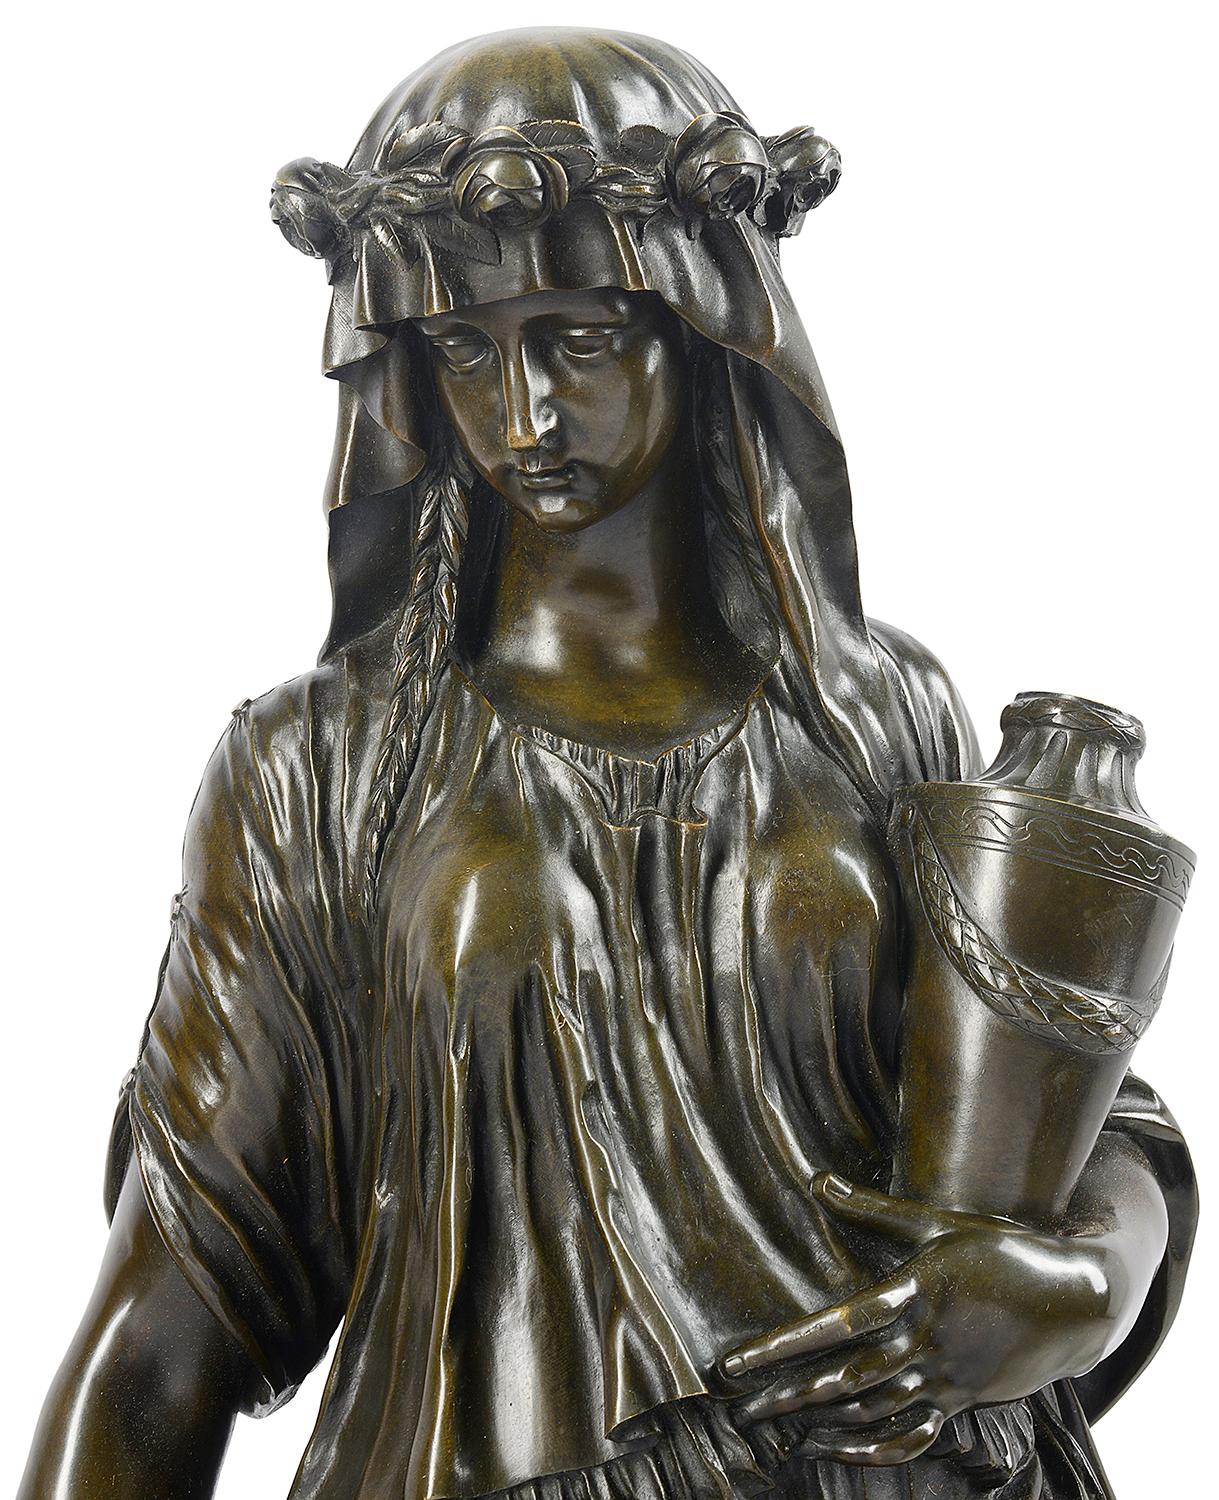 Graux Marly Large Bronze Statue of a Classical Female Figure, 19th Century For Sale 1